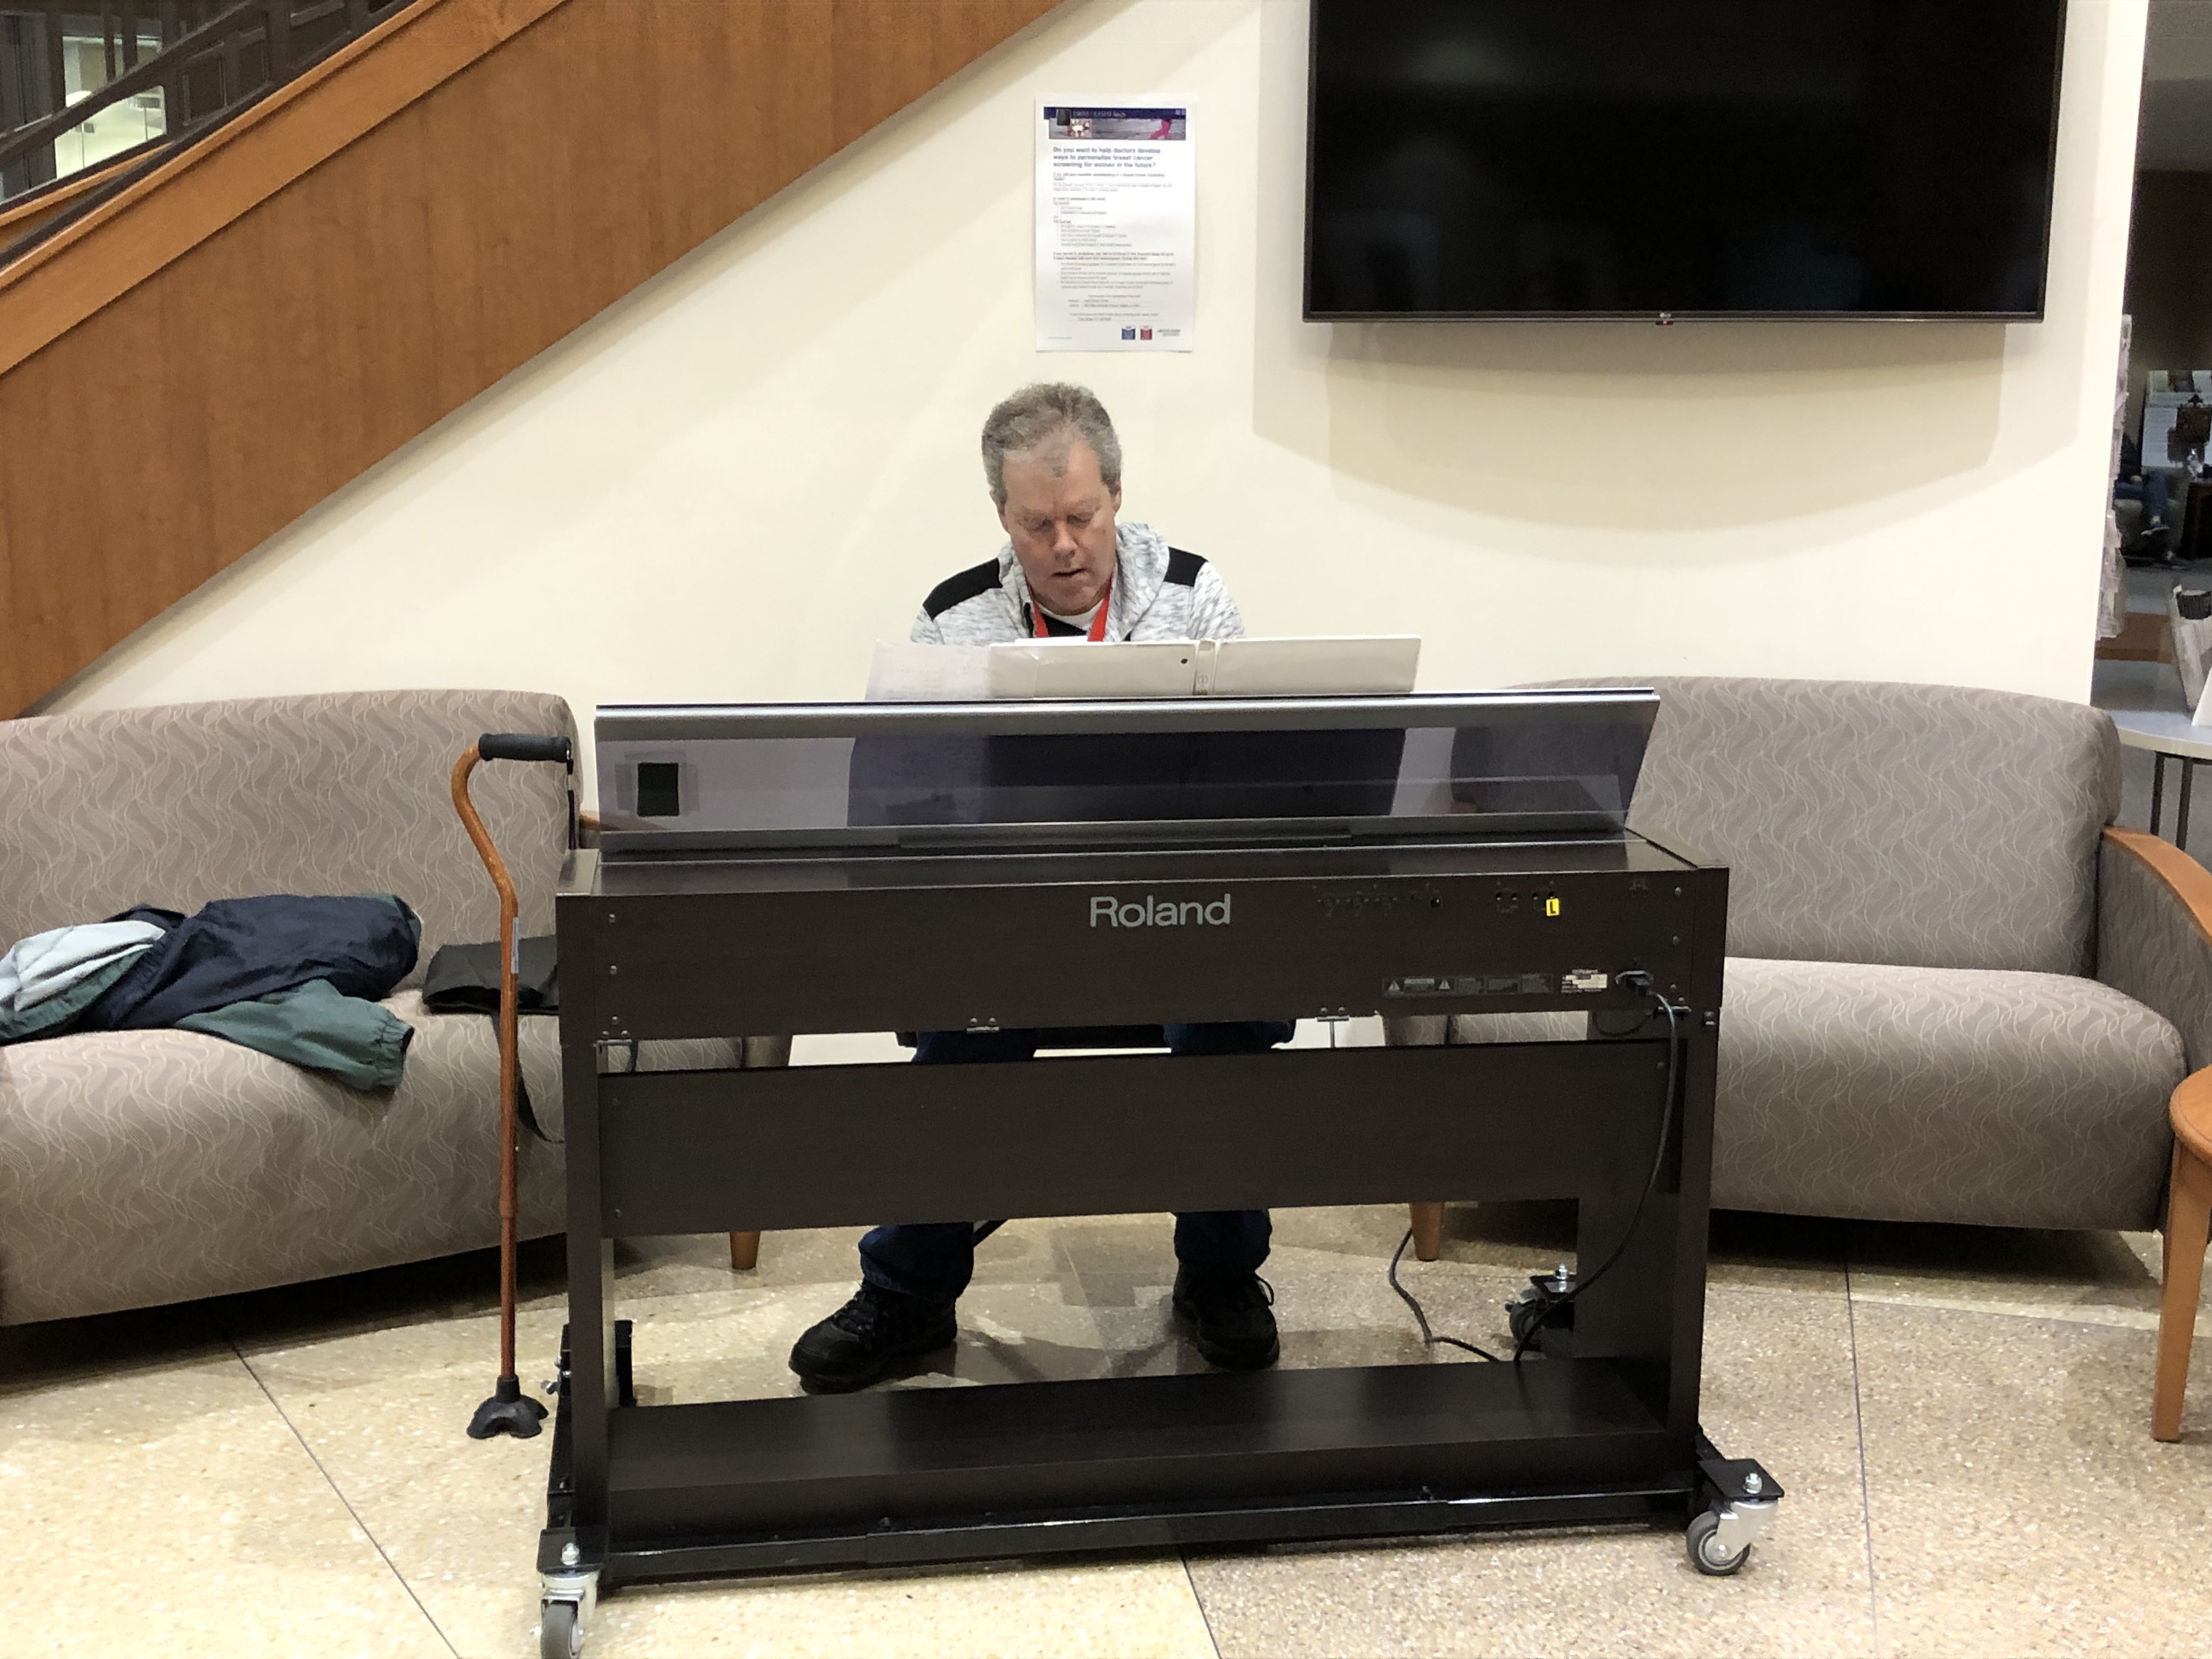 Volunteer overcomes stroke, gives back to others as a piano player